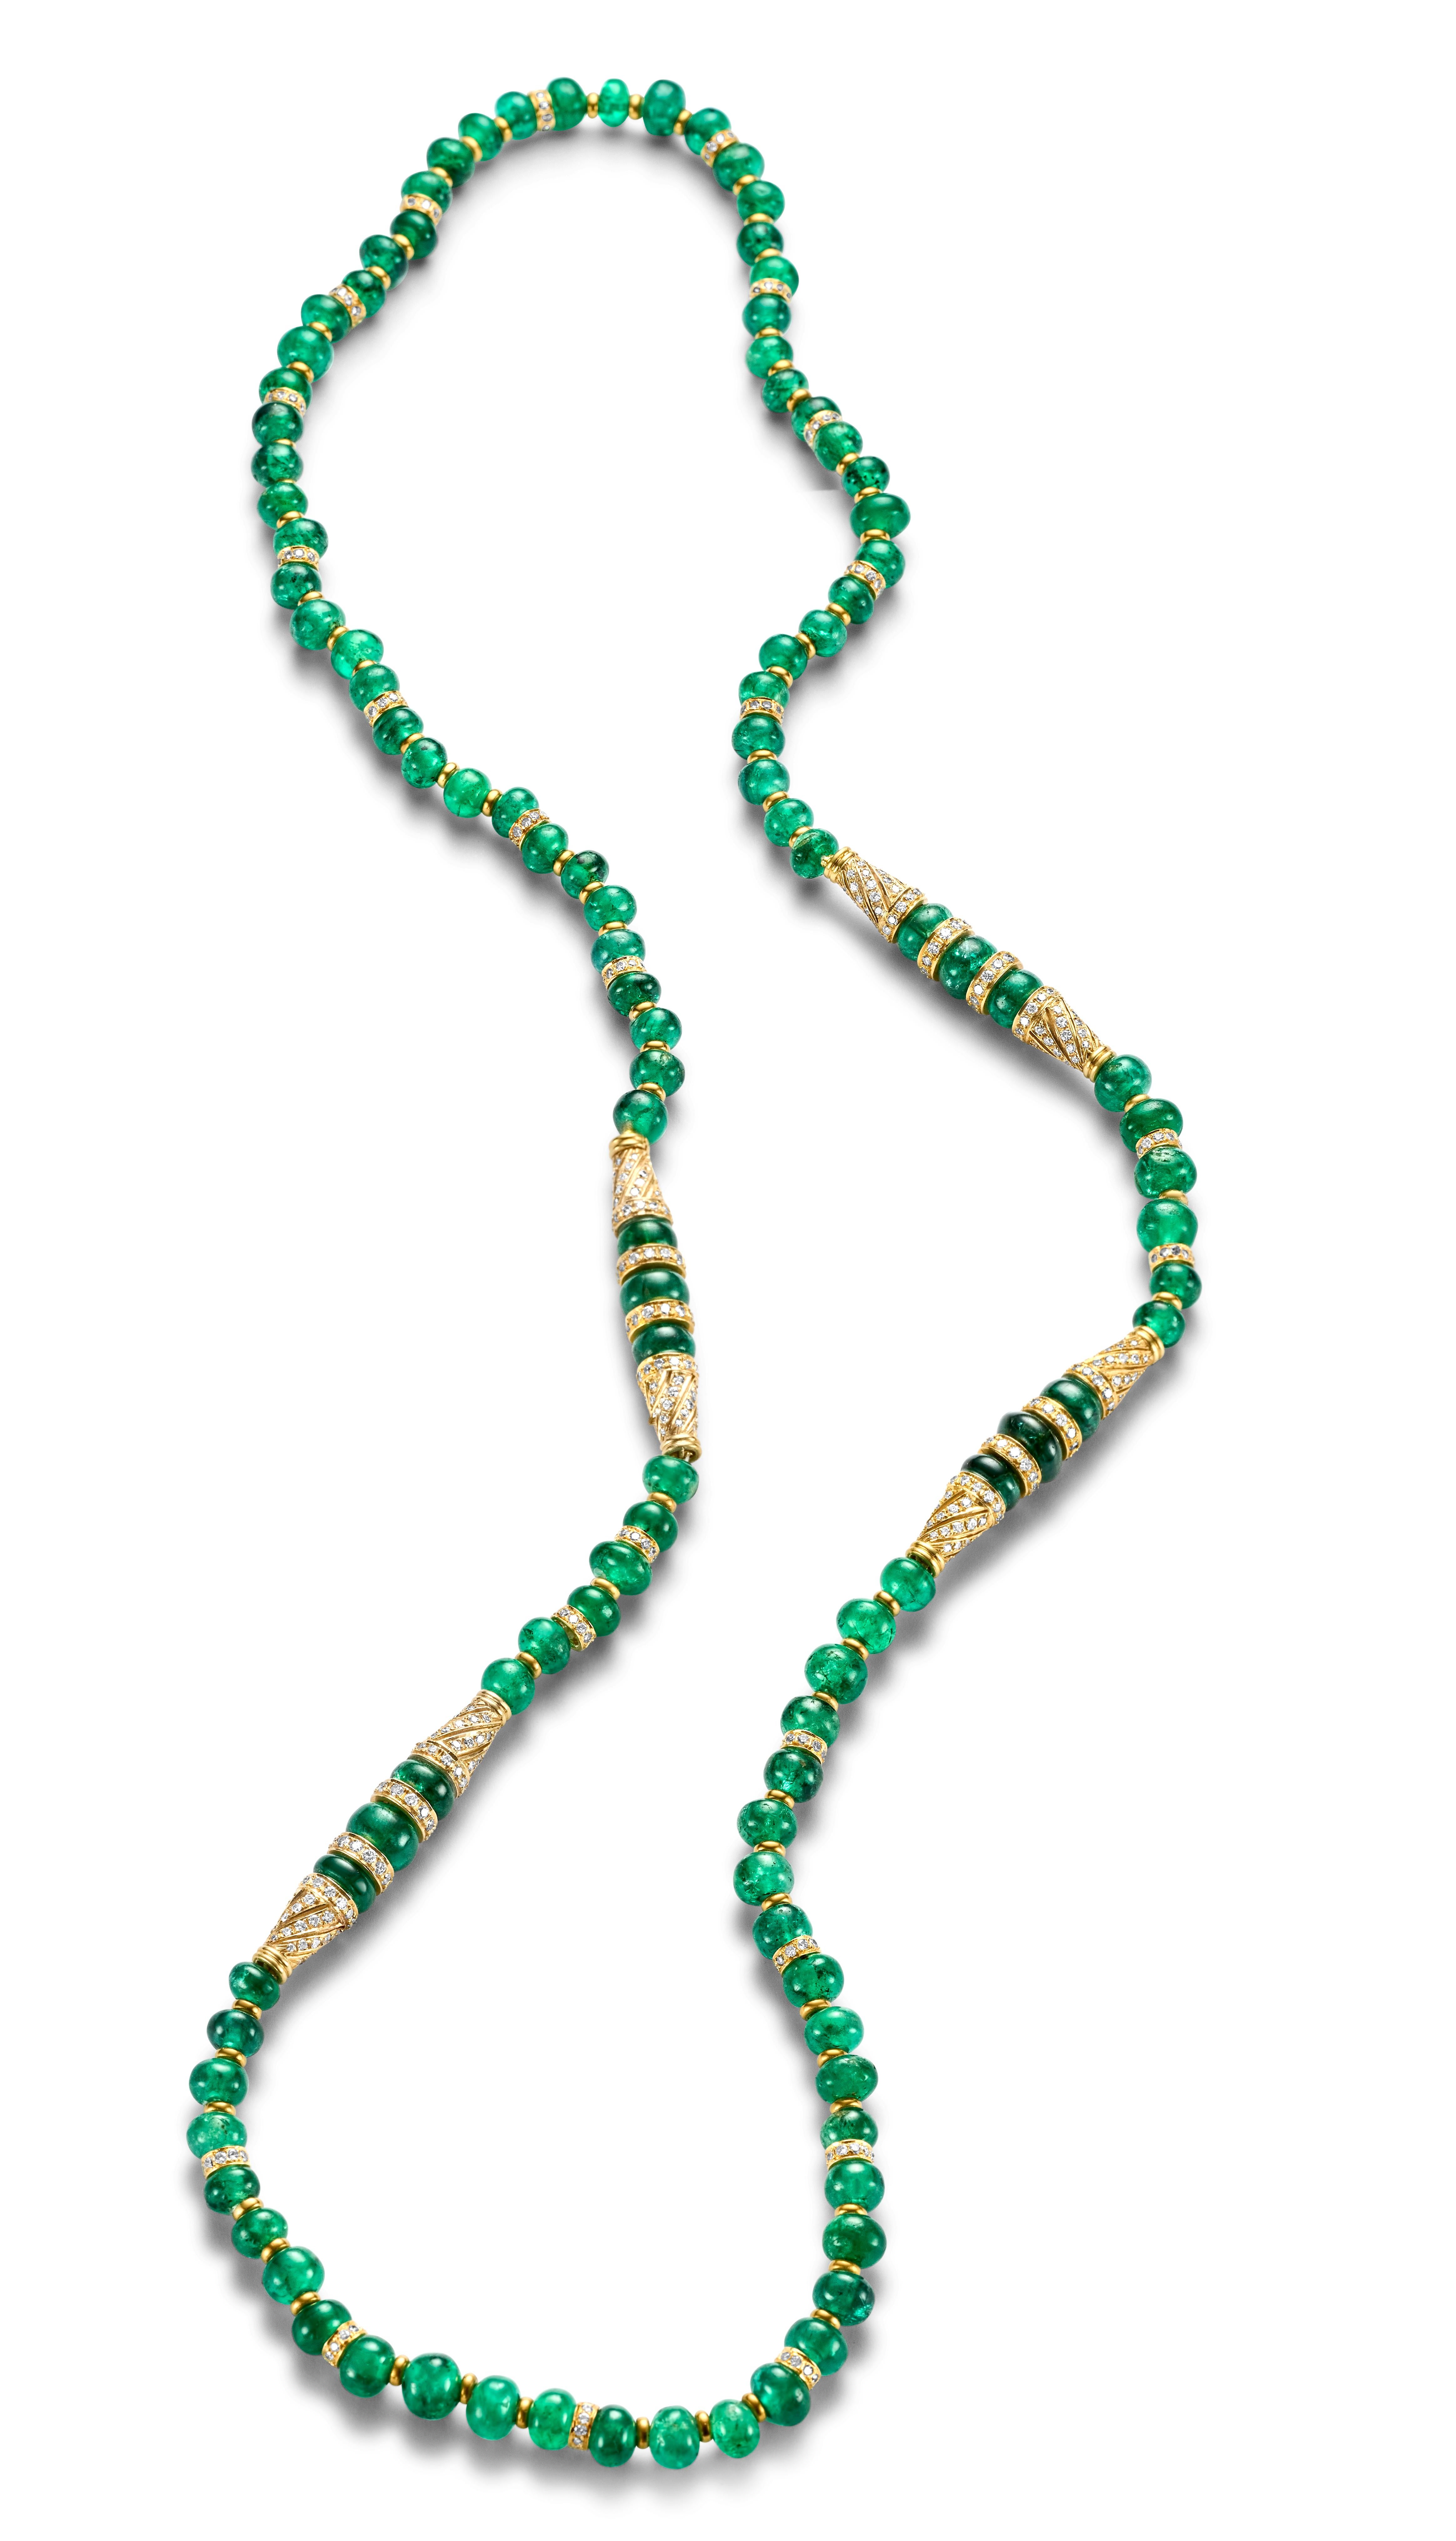 Adler Genèva 18kt Gold Necklaces 480ct Faceted Bead Emeralds CGL Certified In Excellent Condition For Sale In Antwerp, BE